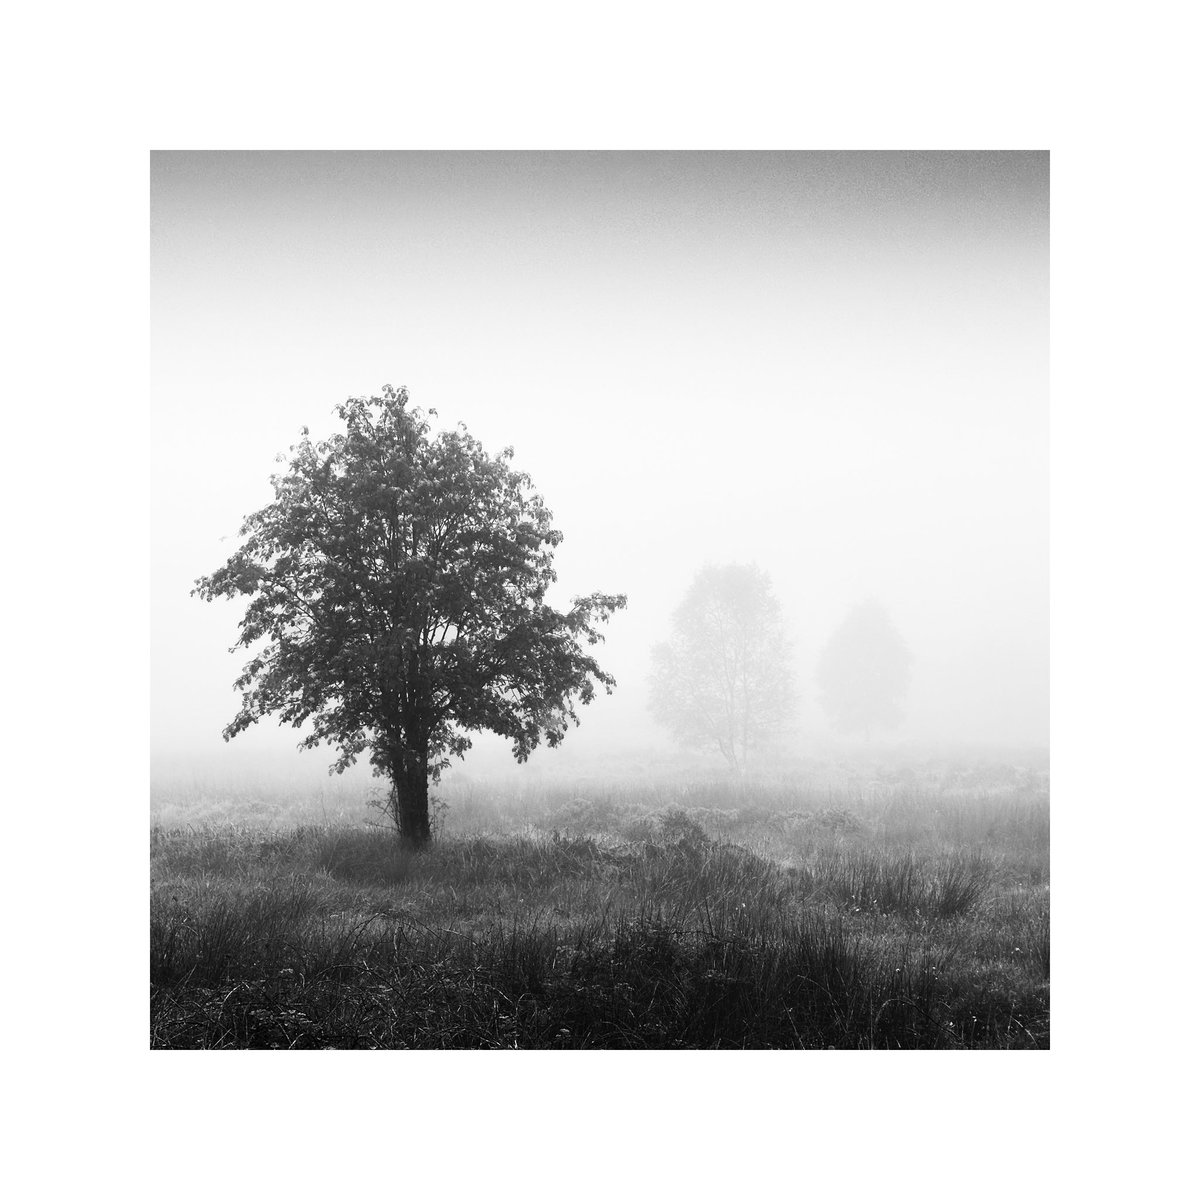 Haven’t had time to process the raw image so here is the iPhone version. 

#sharemondays2024